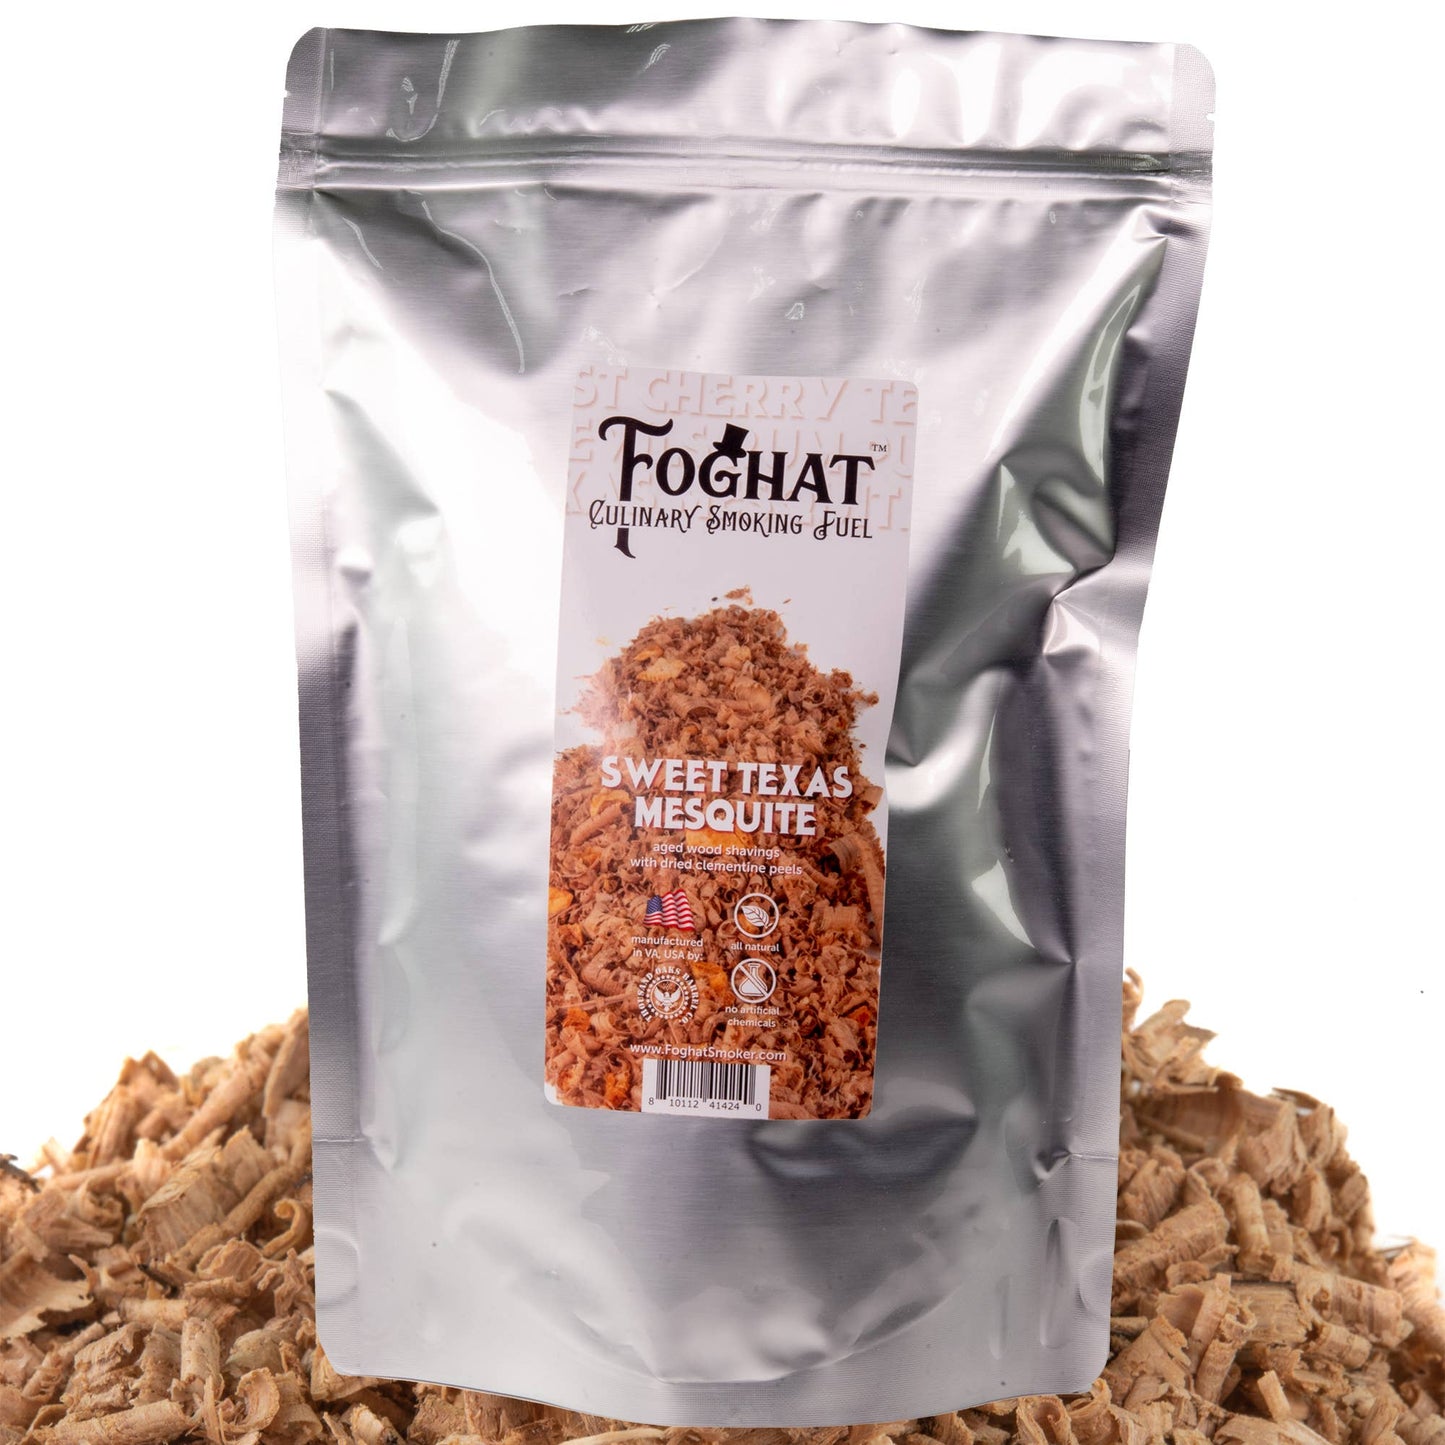 Sweet Texas Mesquite - Foghat Culinary Smoking Fuel - The Tool Store